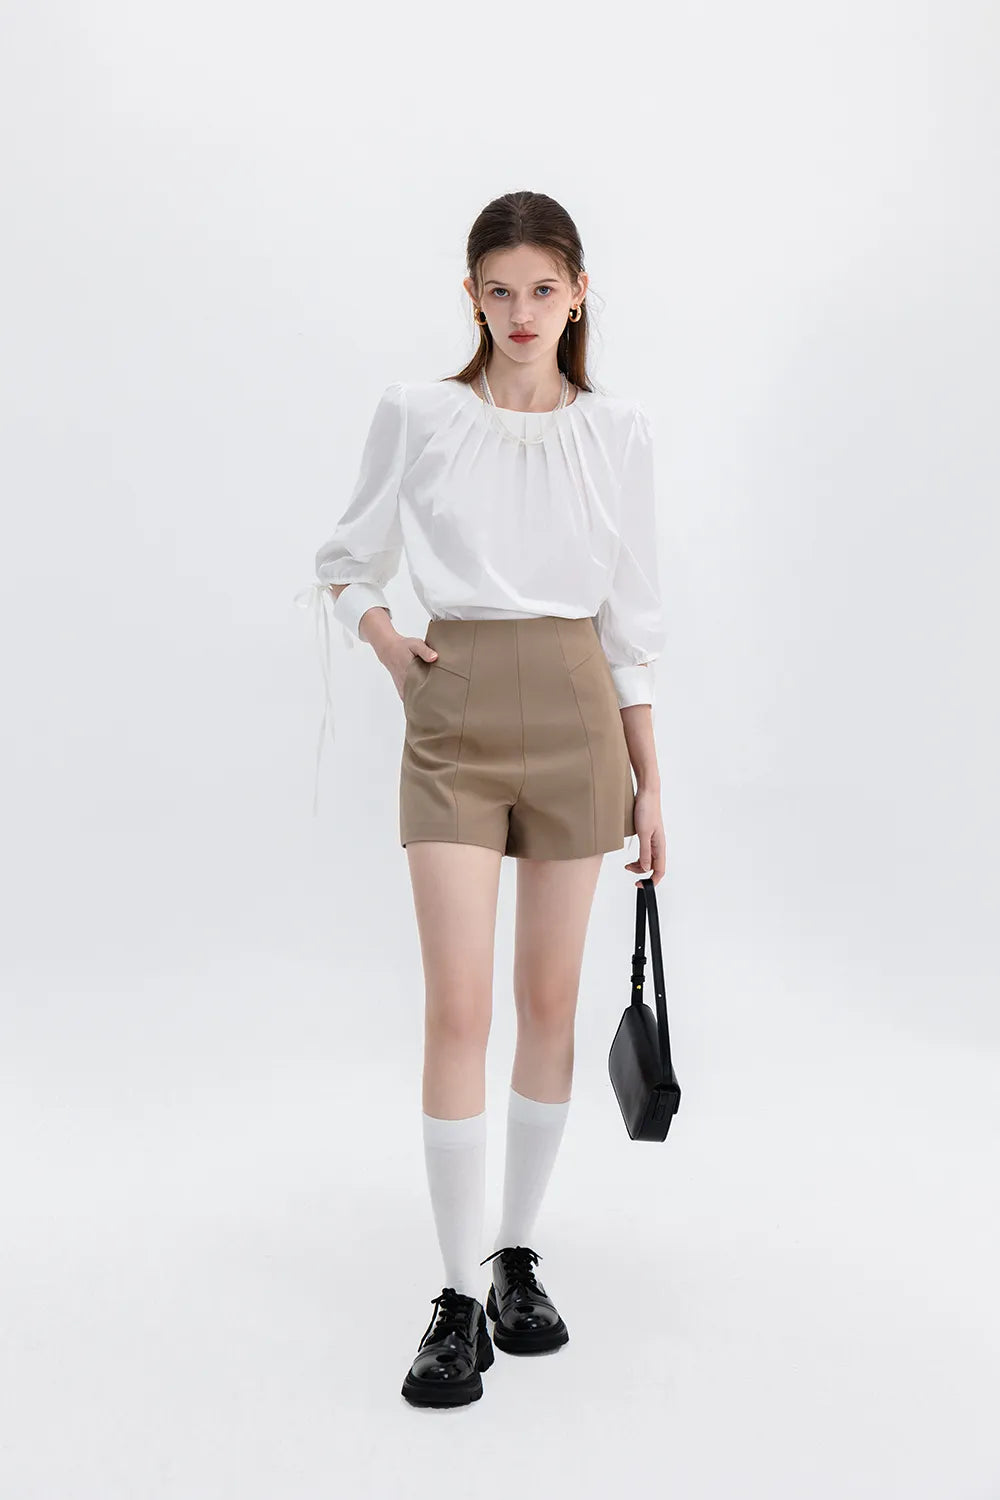 Women's High-Waisted Pleated Shorts - Tailored Design